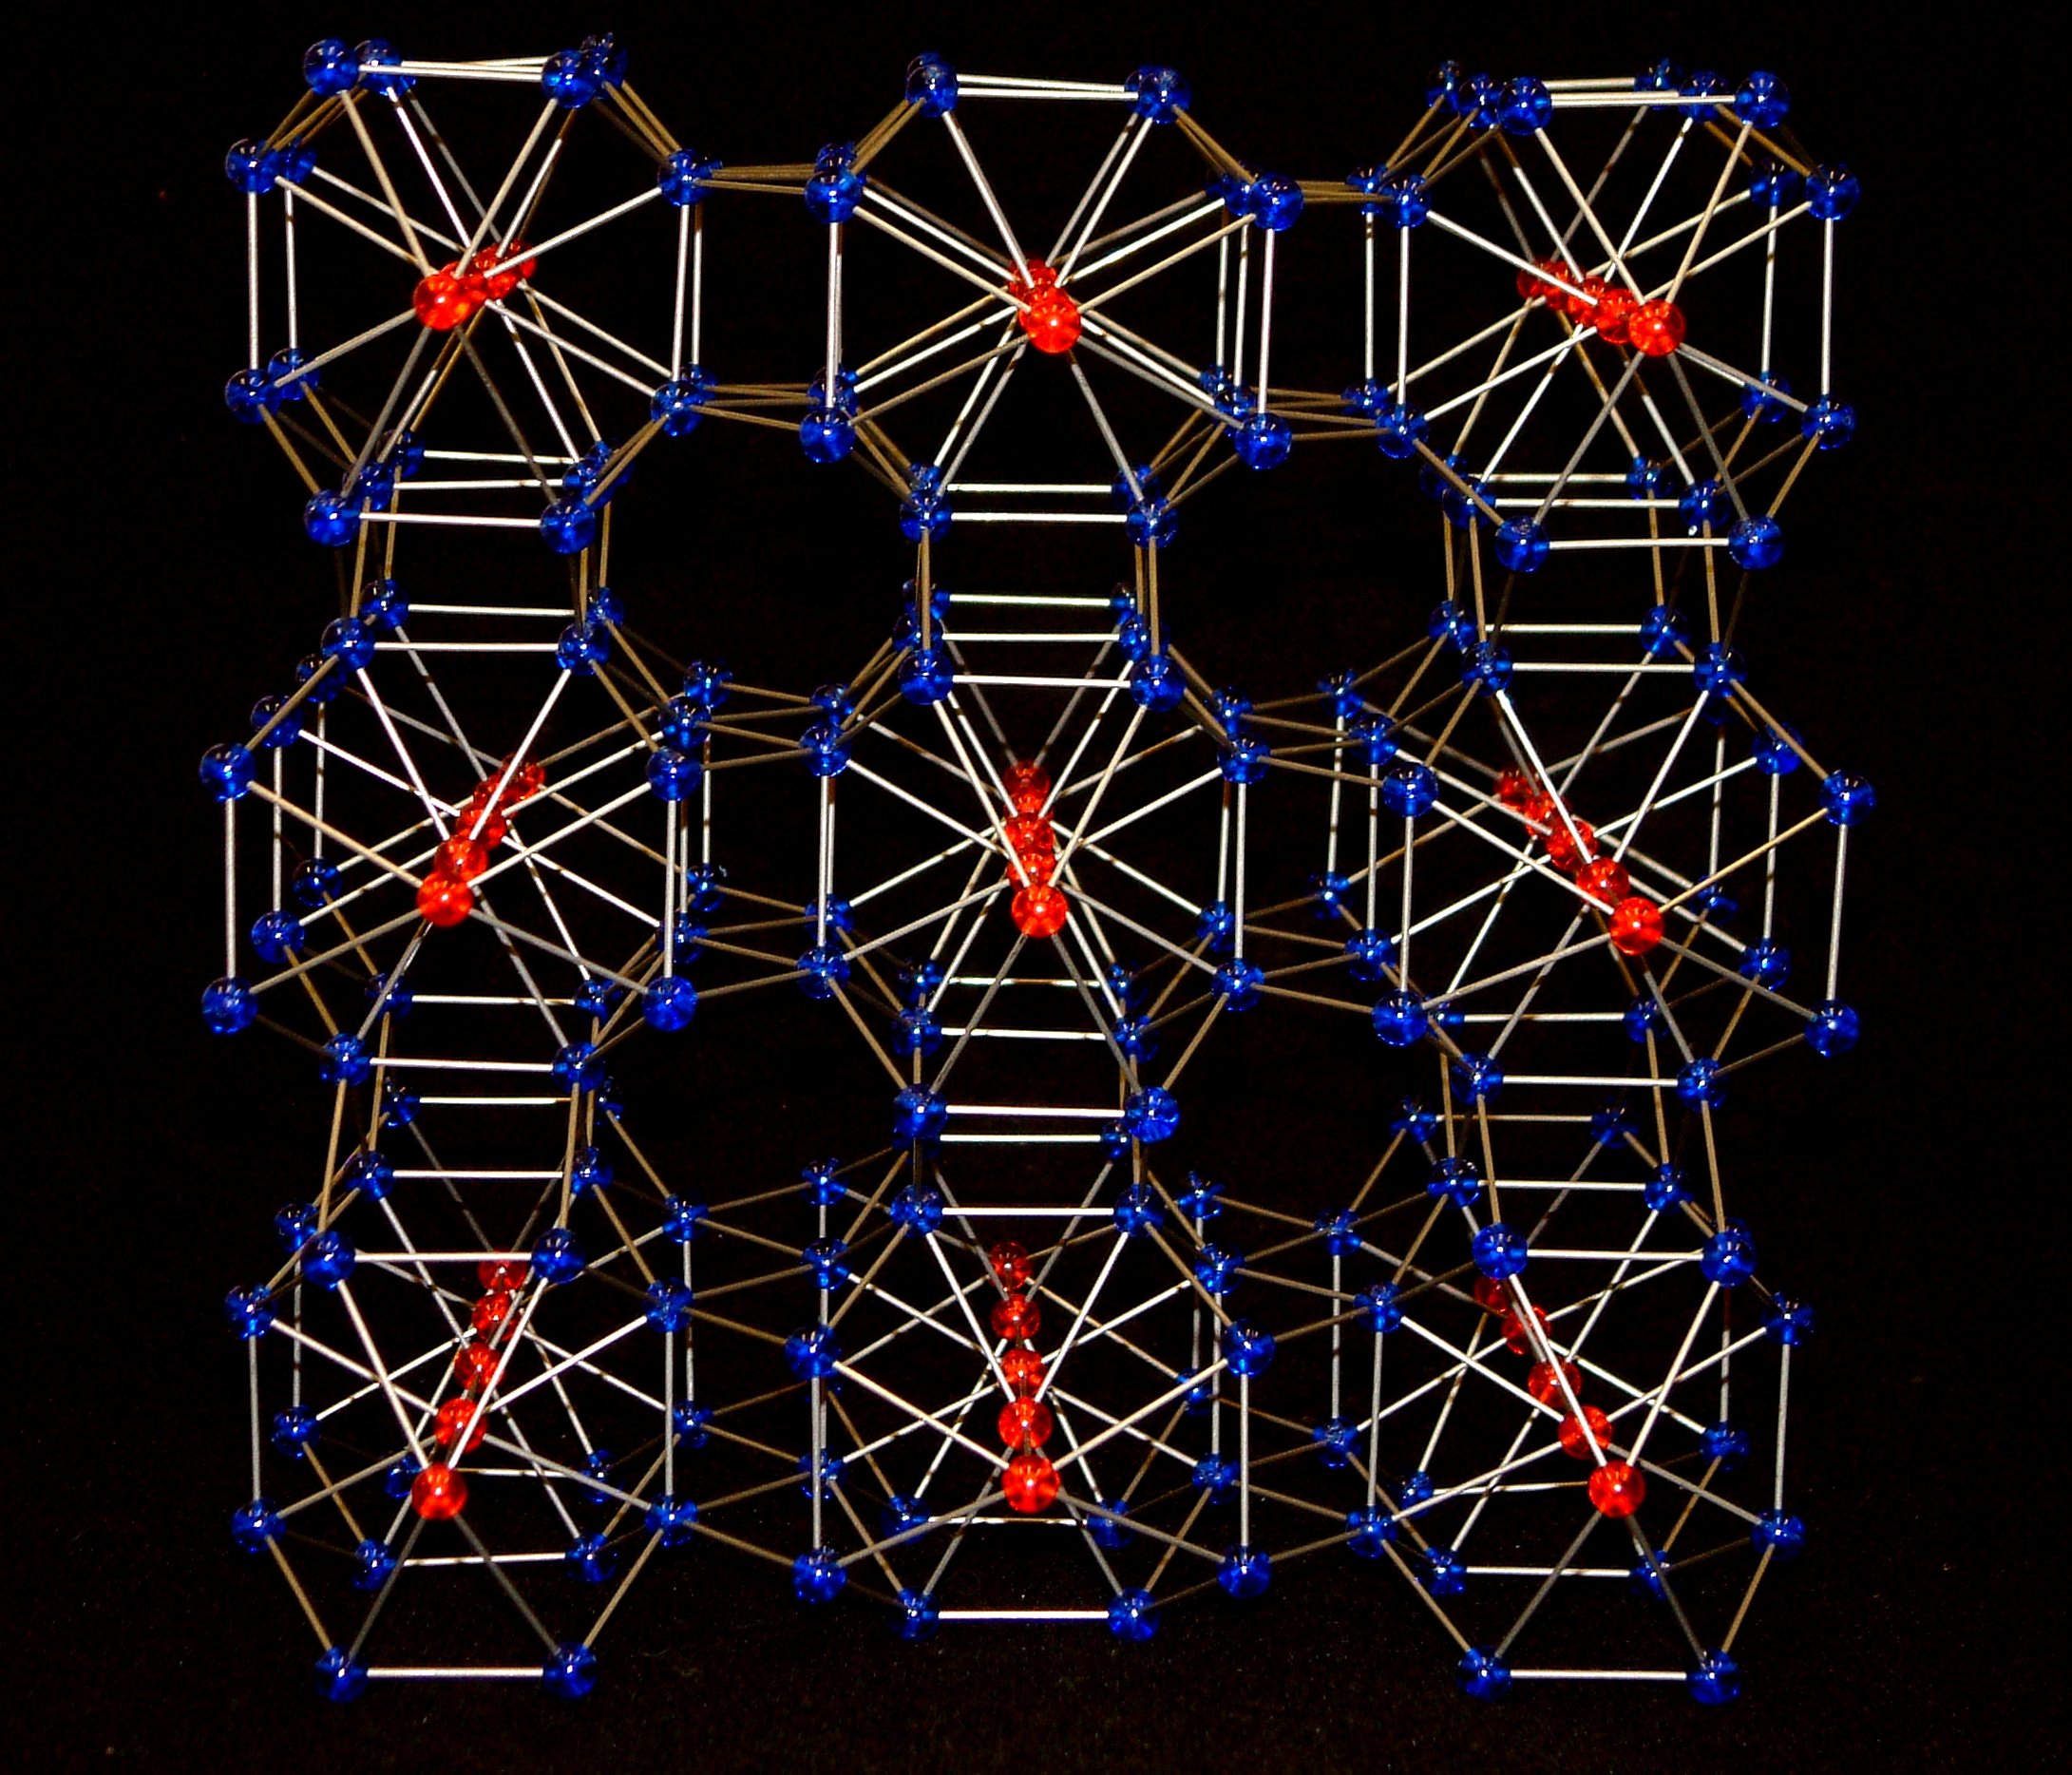 A model showing the crystal structure of Rubidium-IV